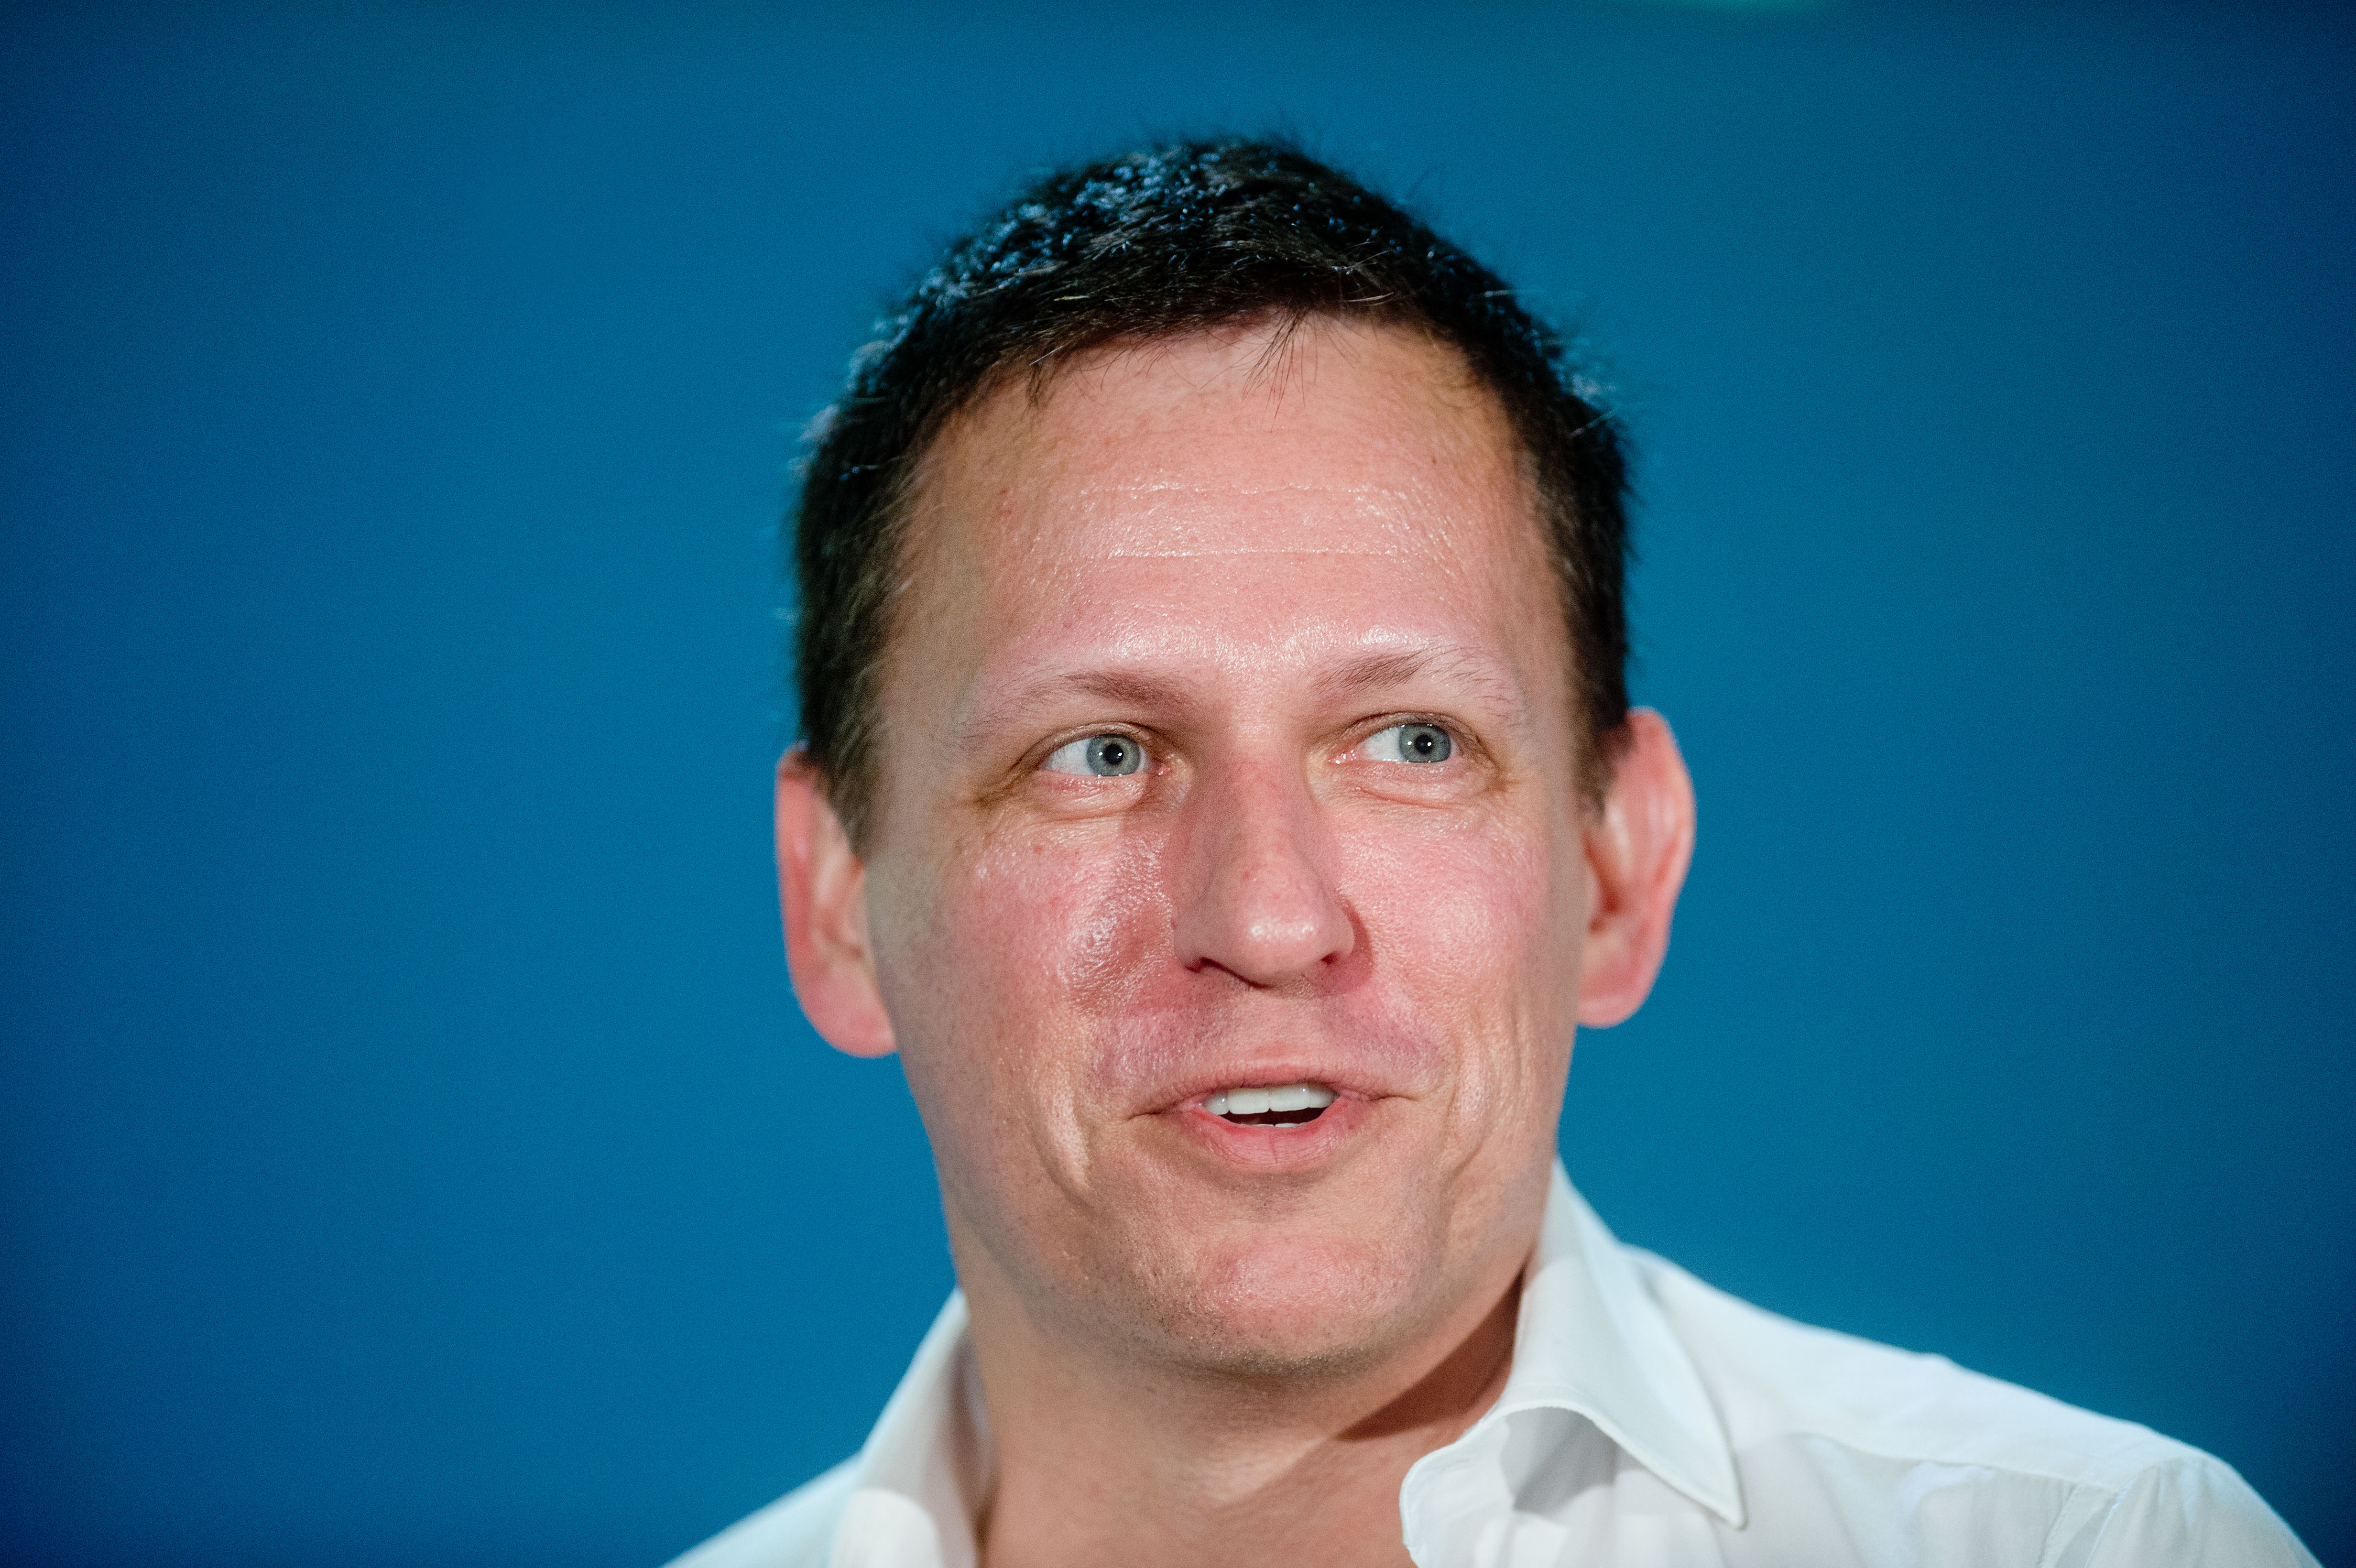 Peter Thiel Confirms He Funded Hulk Hogan's Gawker Lawsuit | Time